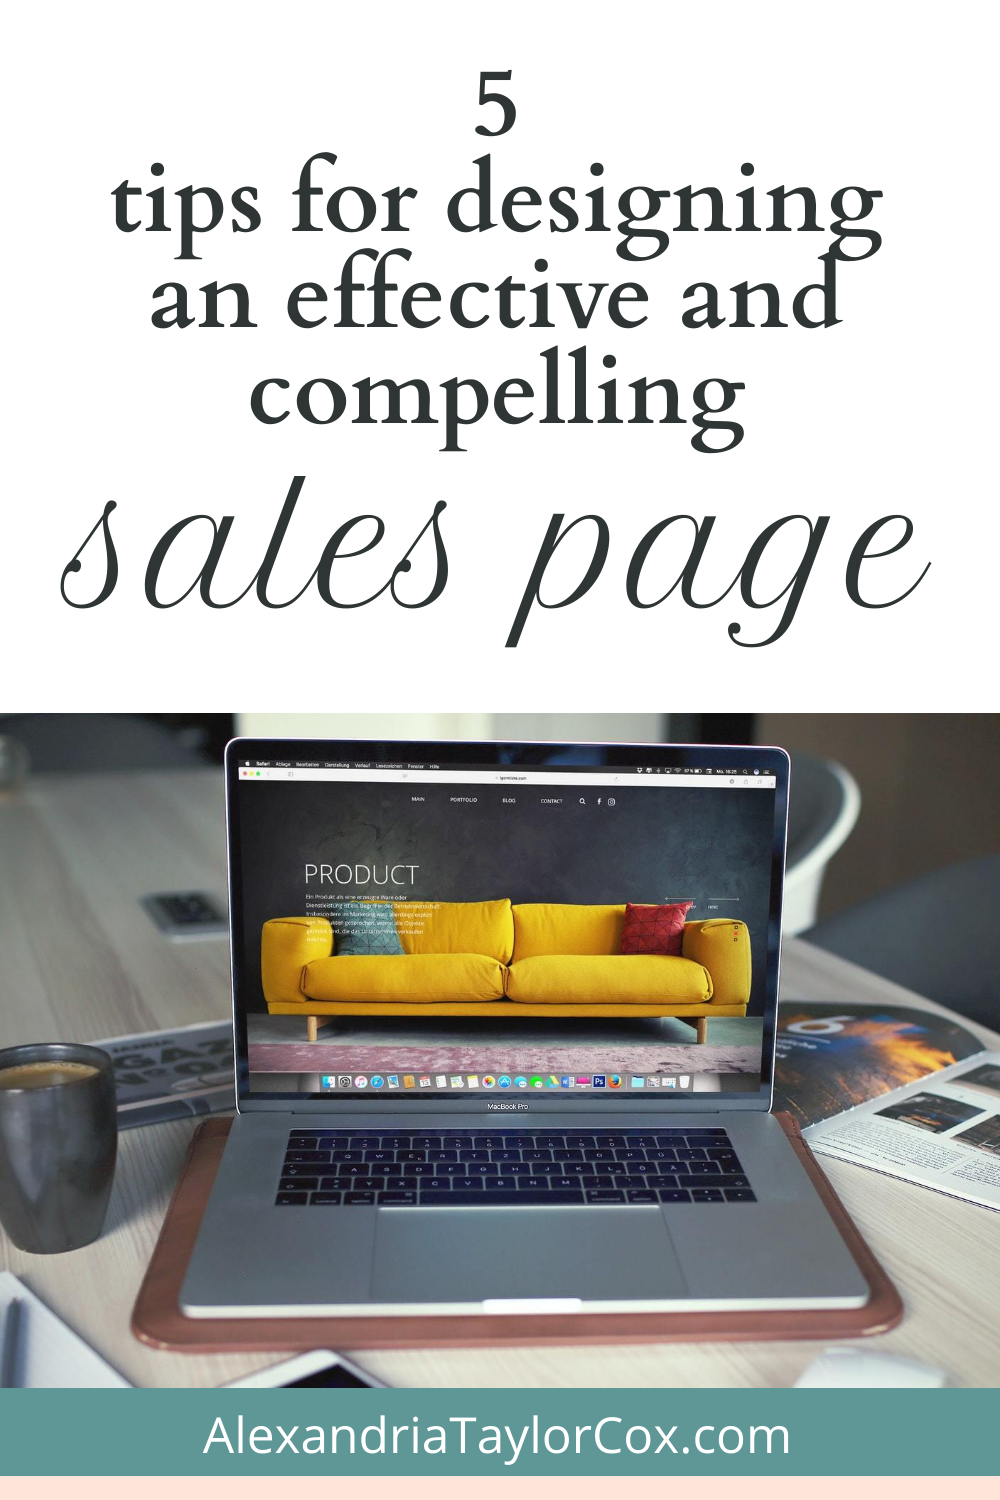 5 Tips for Designing an Effective and Compelling Sales Page